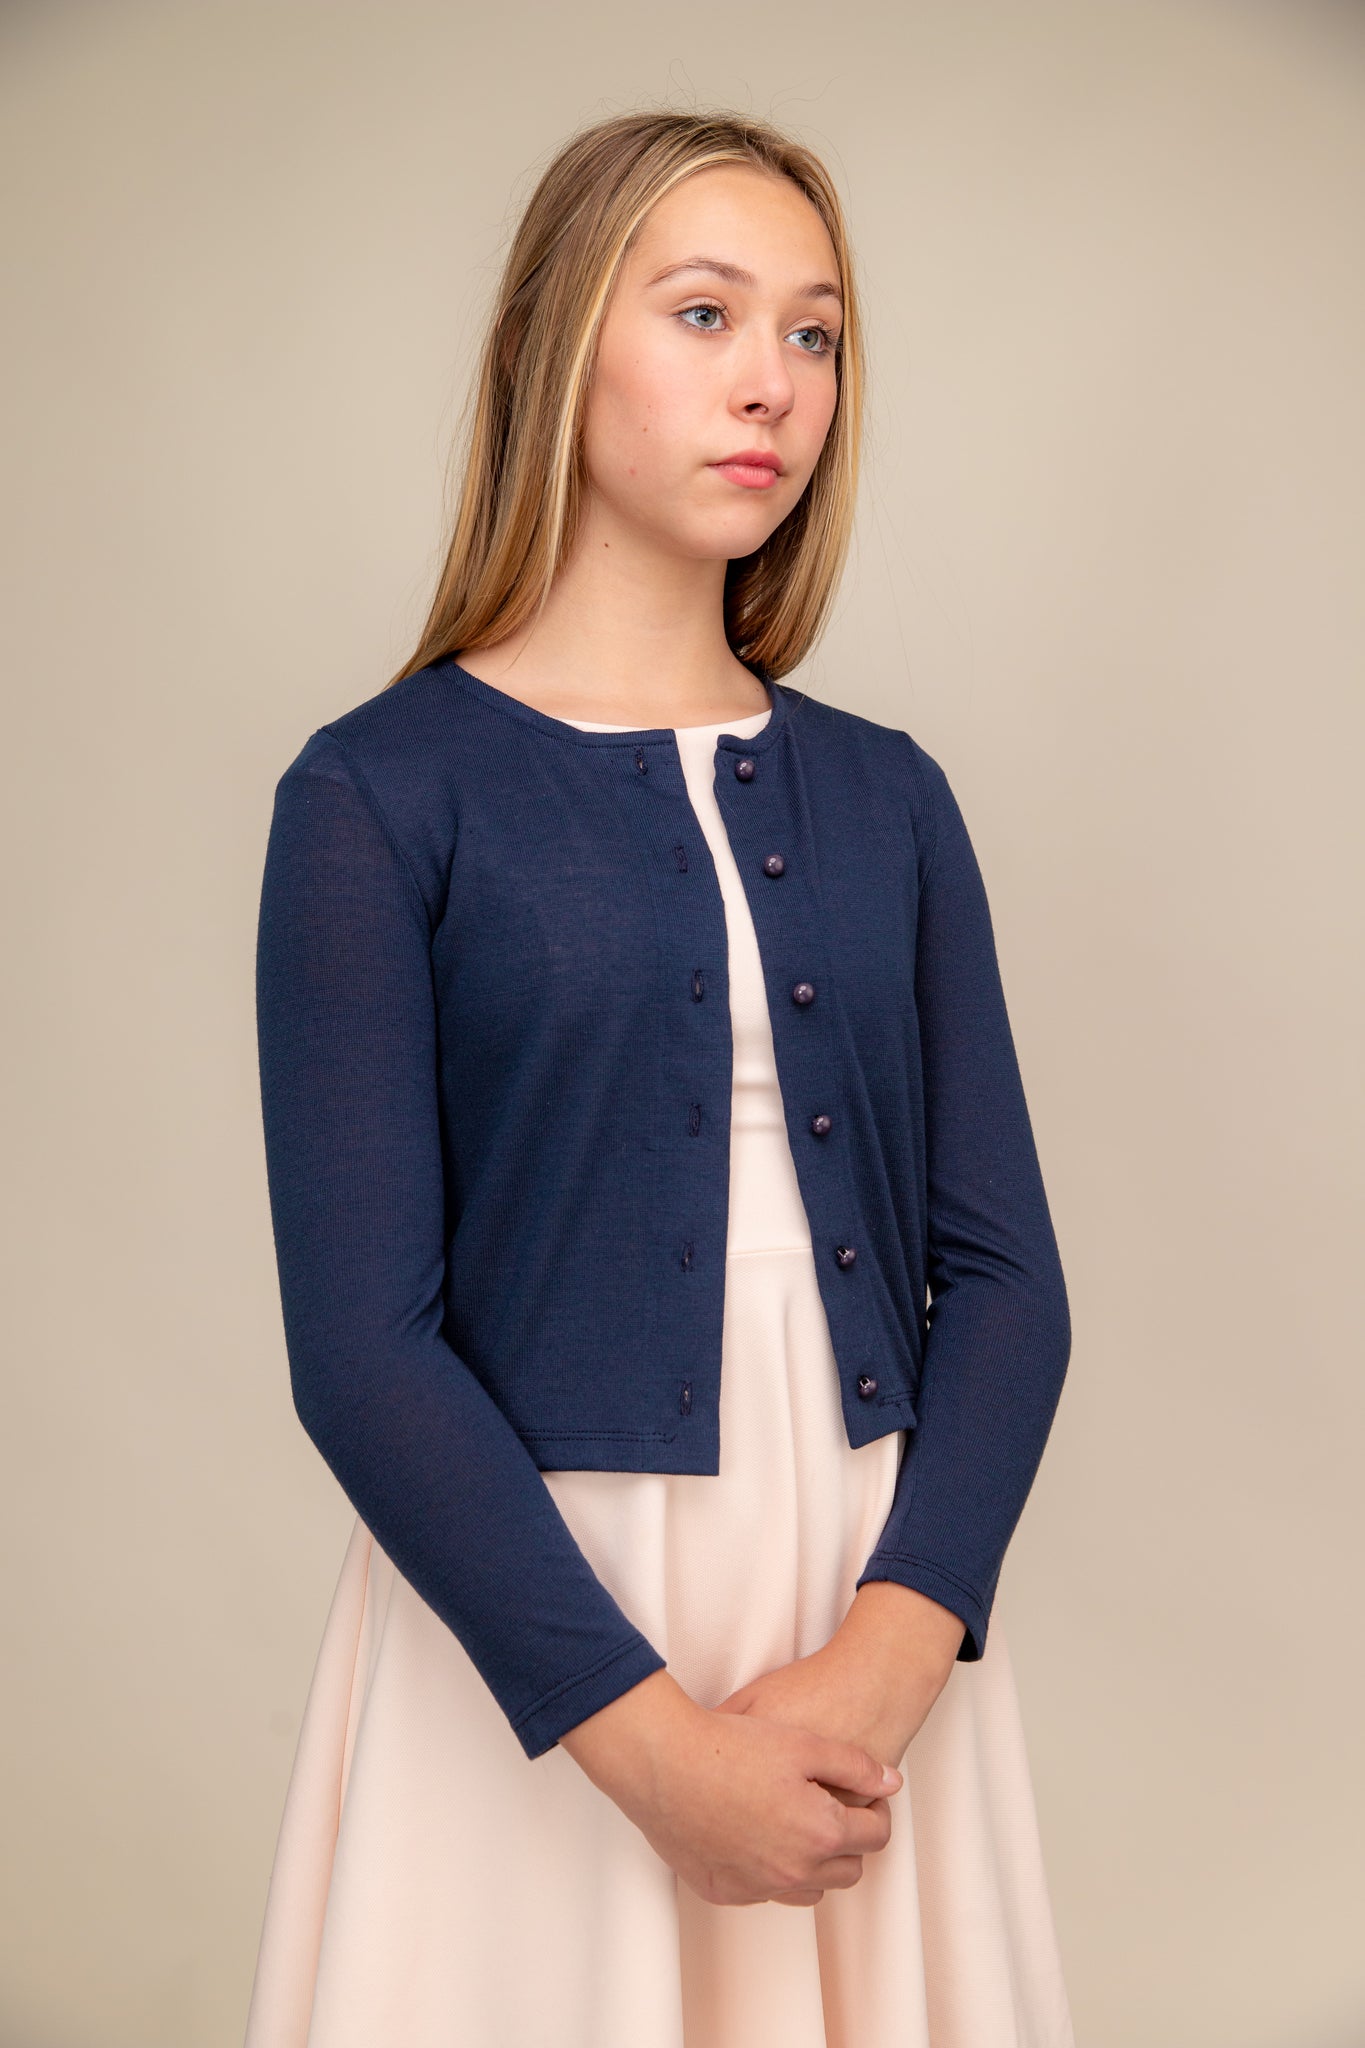 This is a button up cardigan with plastic buttons, scoop neck detailing, three quarter inch sleeve length and all over stretch fabric in navy.